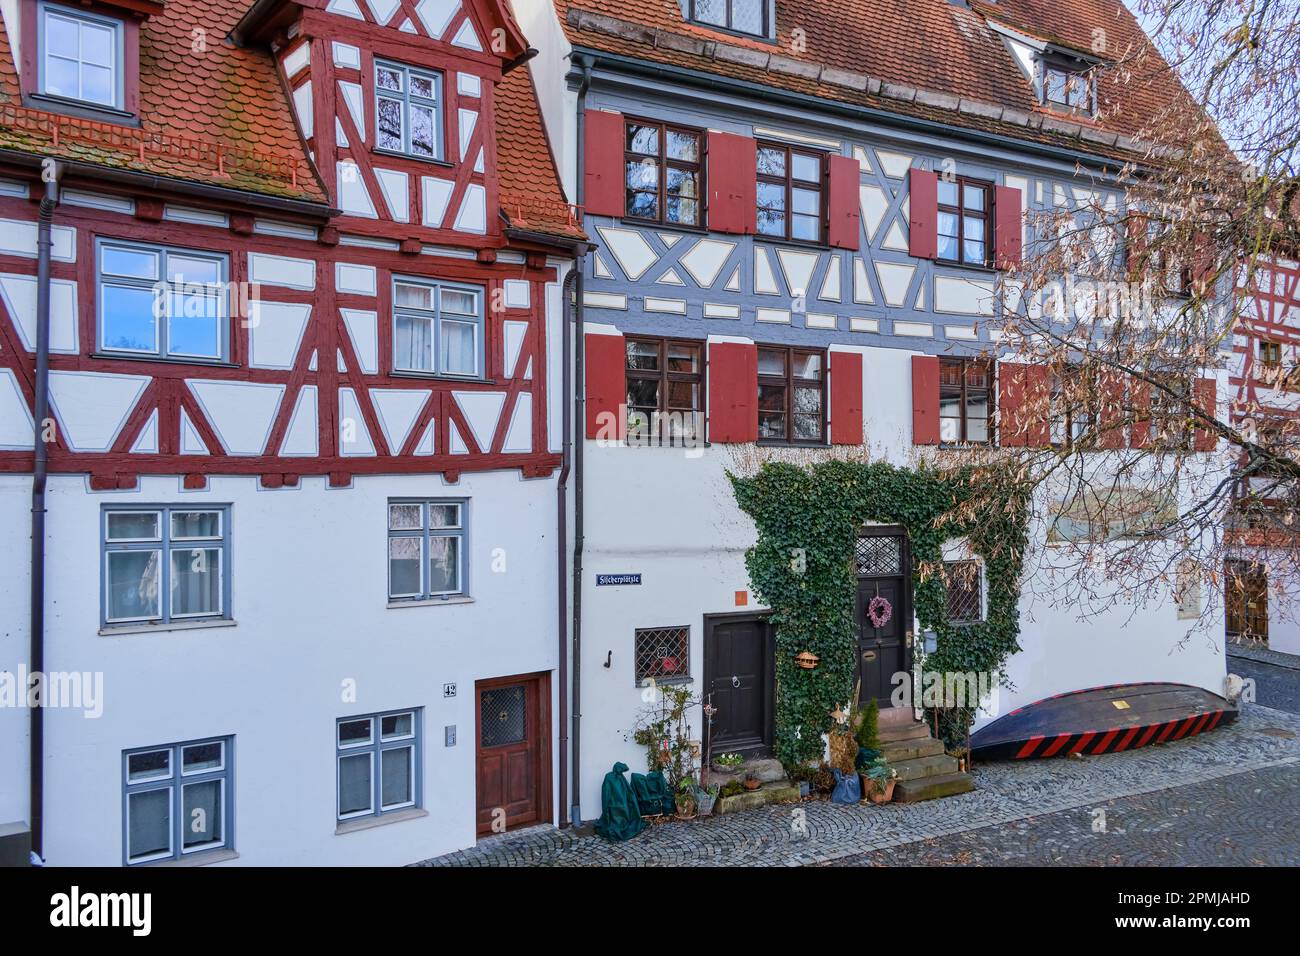 Ulm, Baden-Württemberg, Germany, Europe, the so-called Schönes Haus (Beautiful House), a listed building in Fischergasse no. 40. Stock Photo